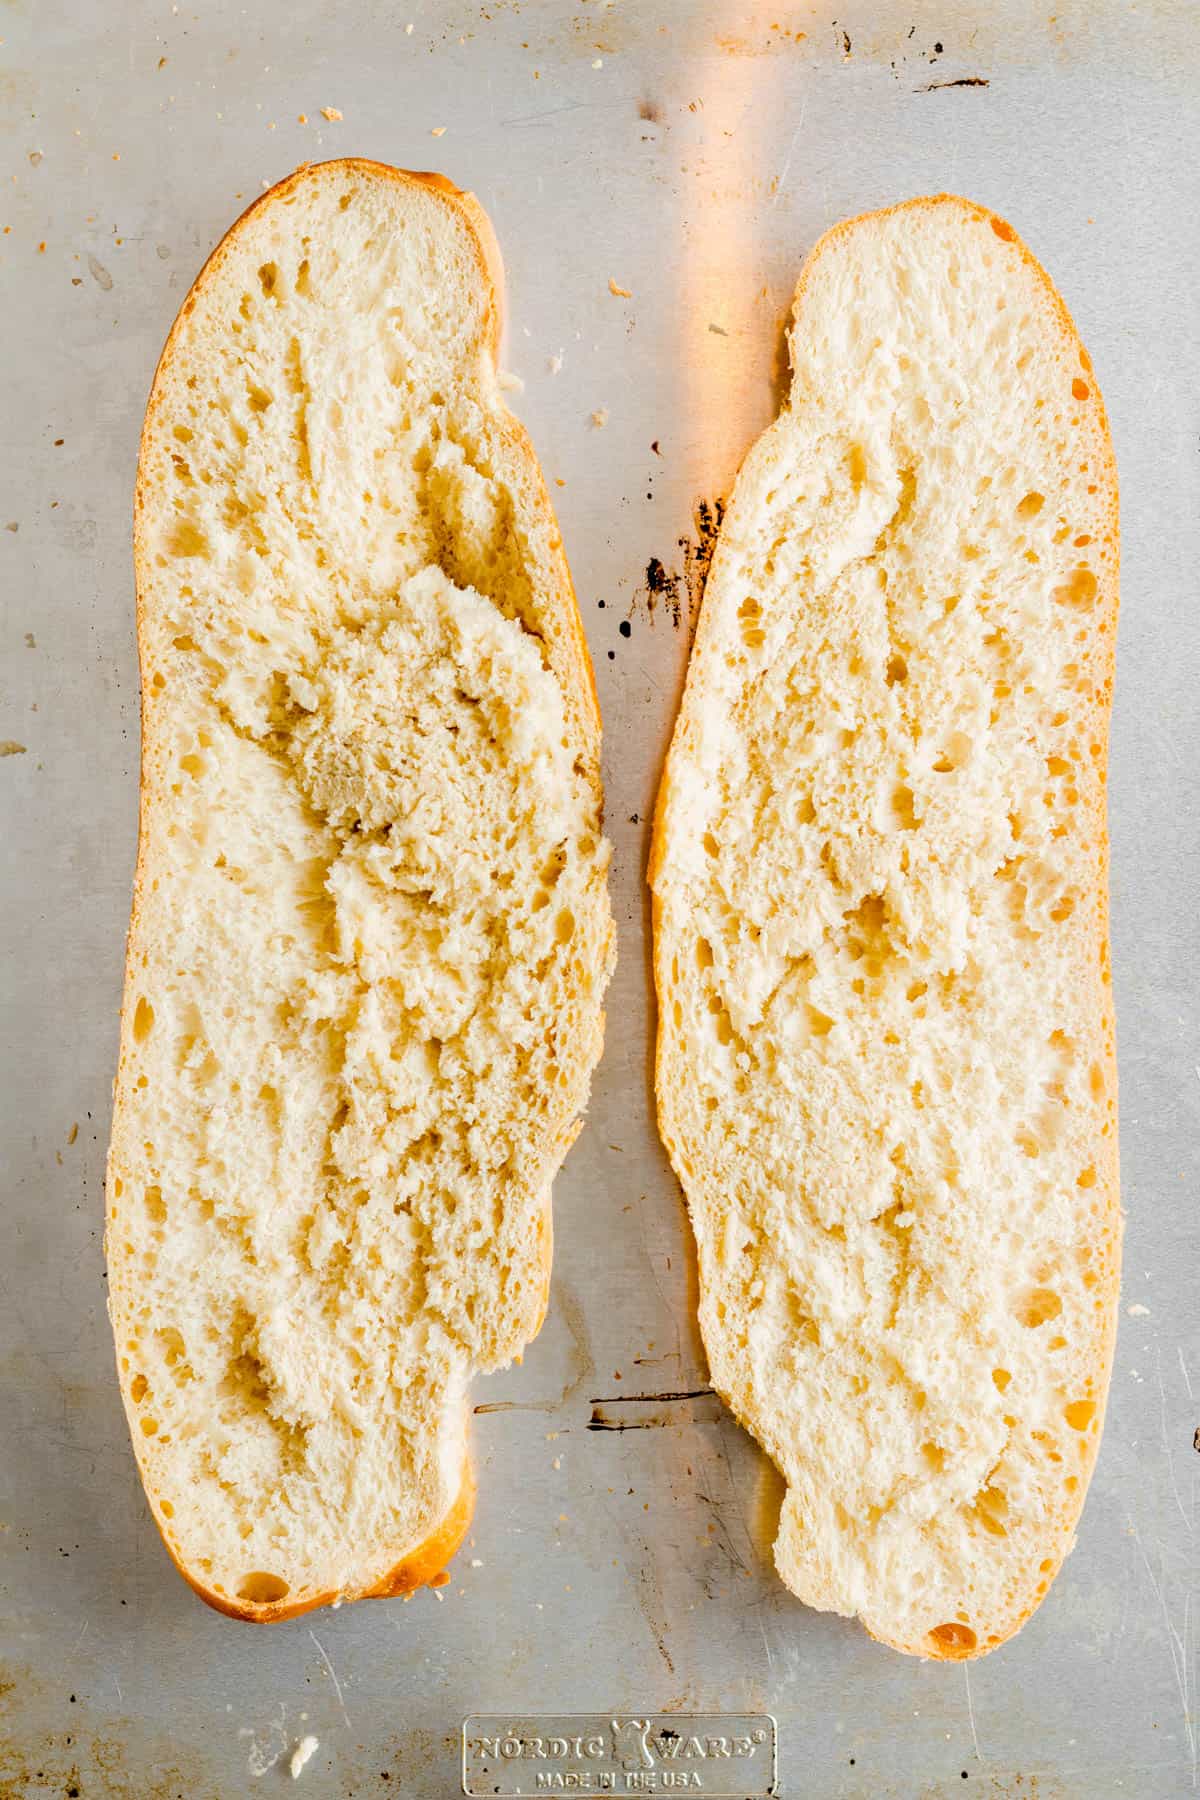 Italian bread sliced in half long ways and placed on a baking sheet.